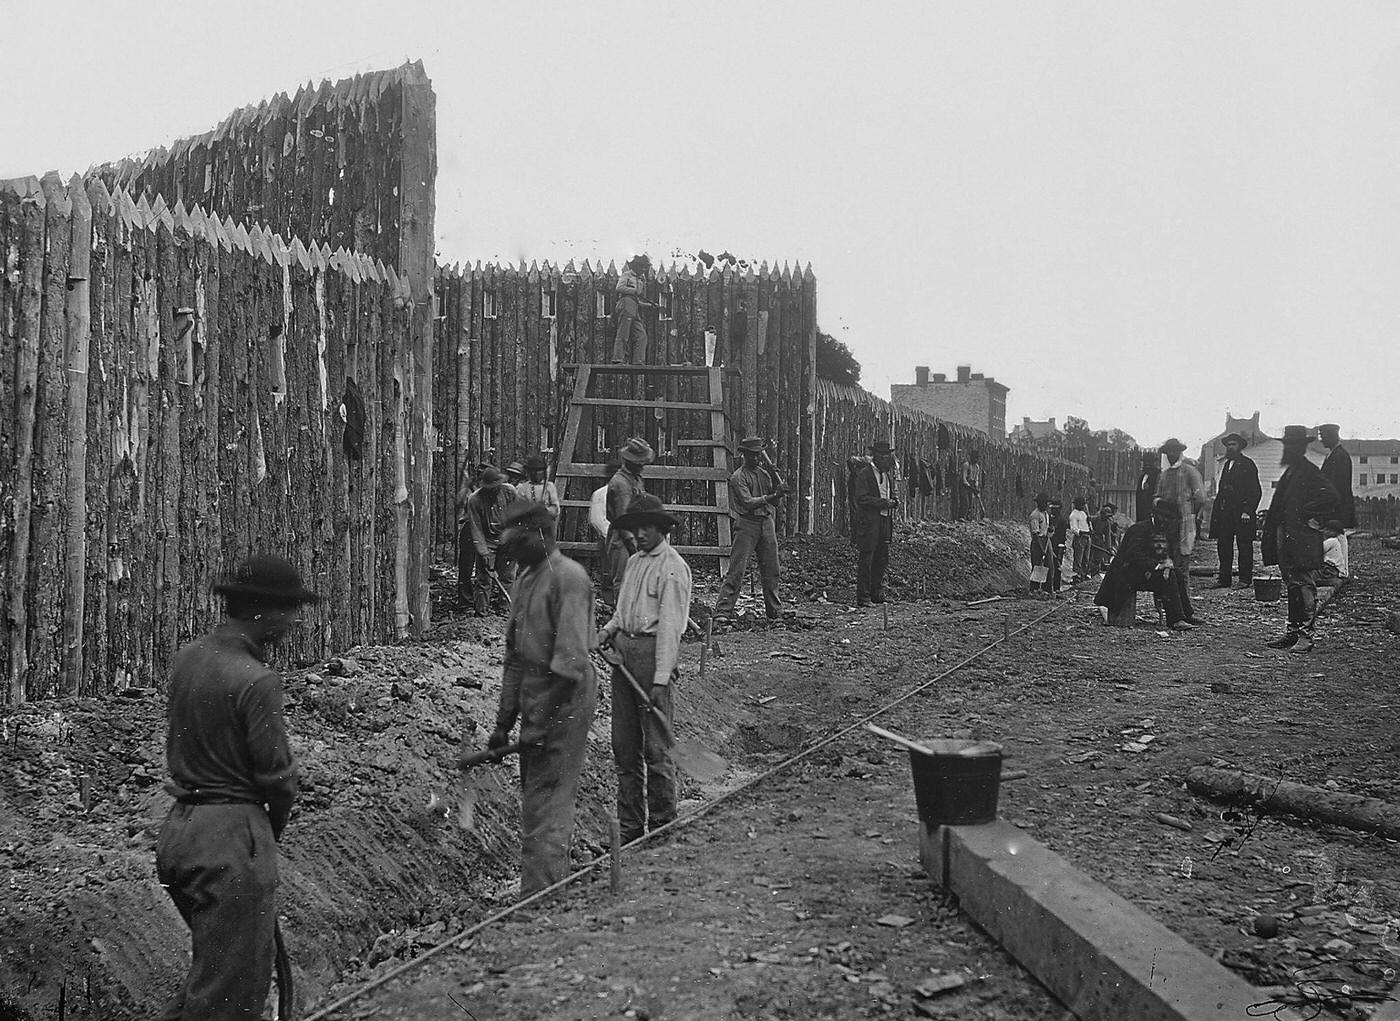 Workers build fortifications and barricades, Alexandria, Virginia, 1860s.